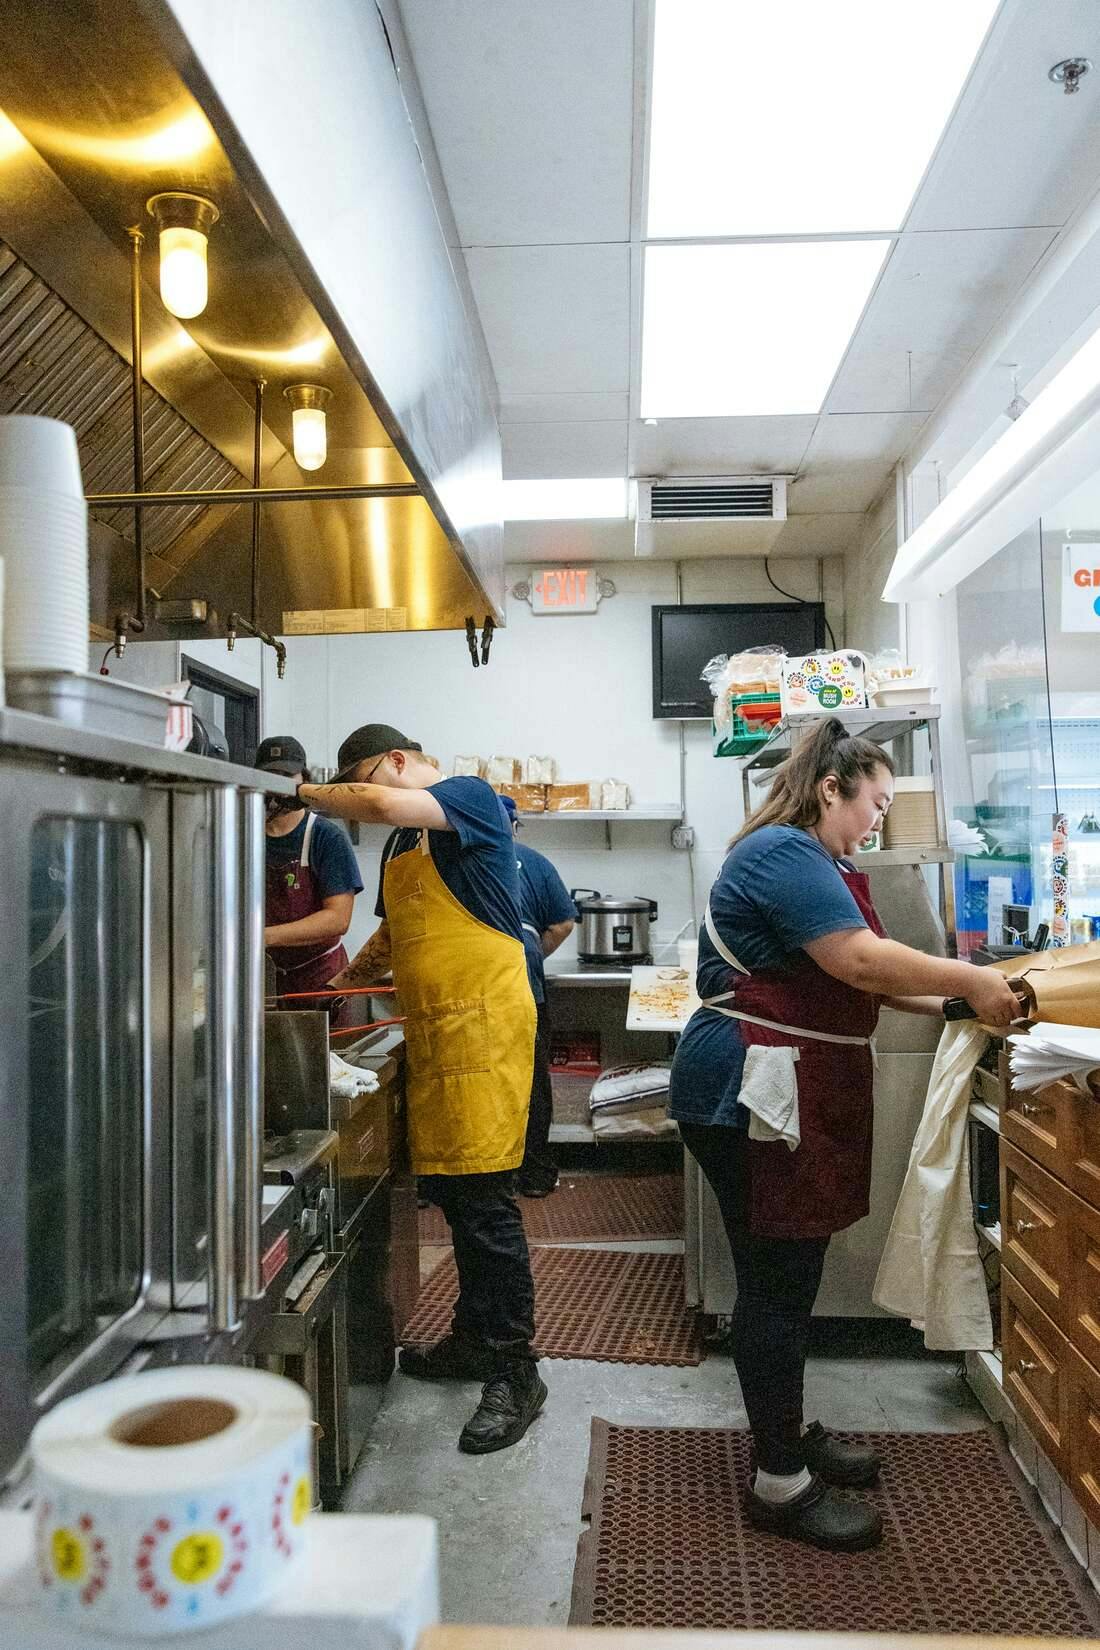 Image of restaurant workers in the kitchen